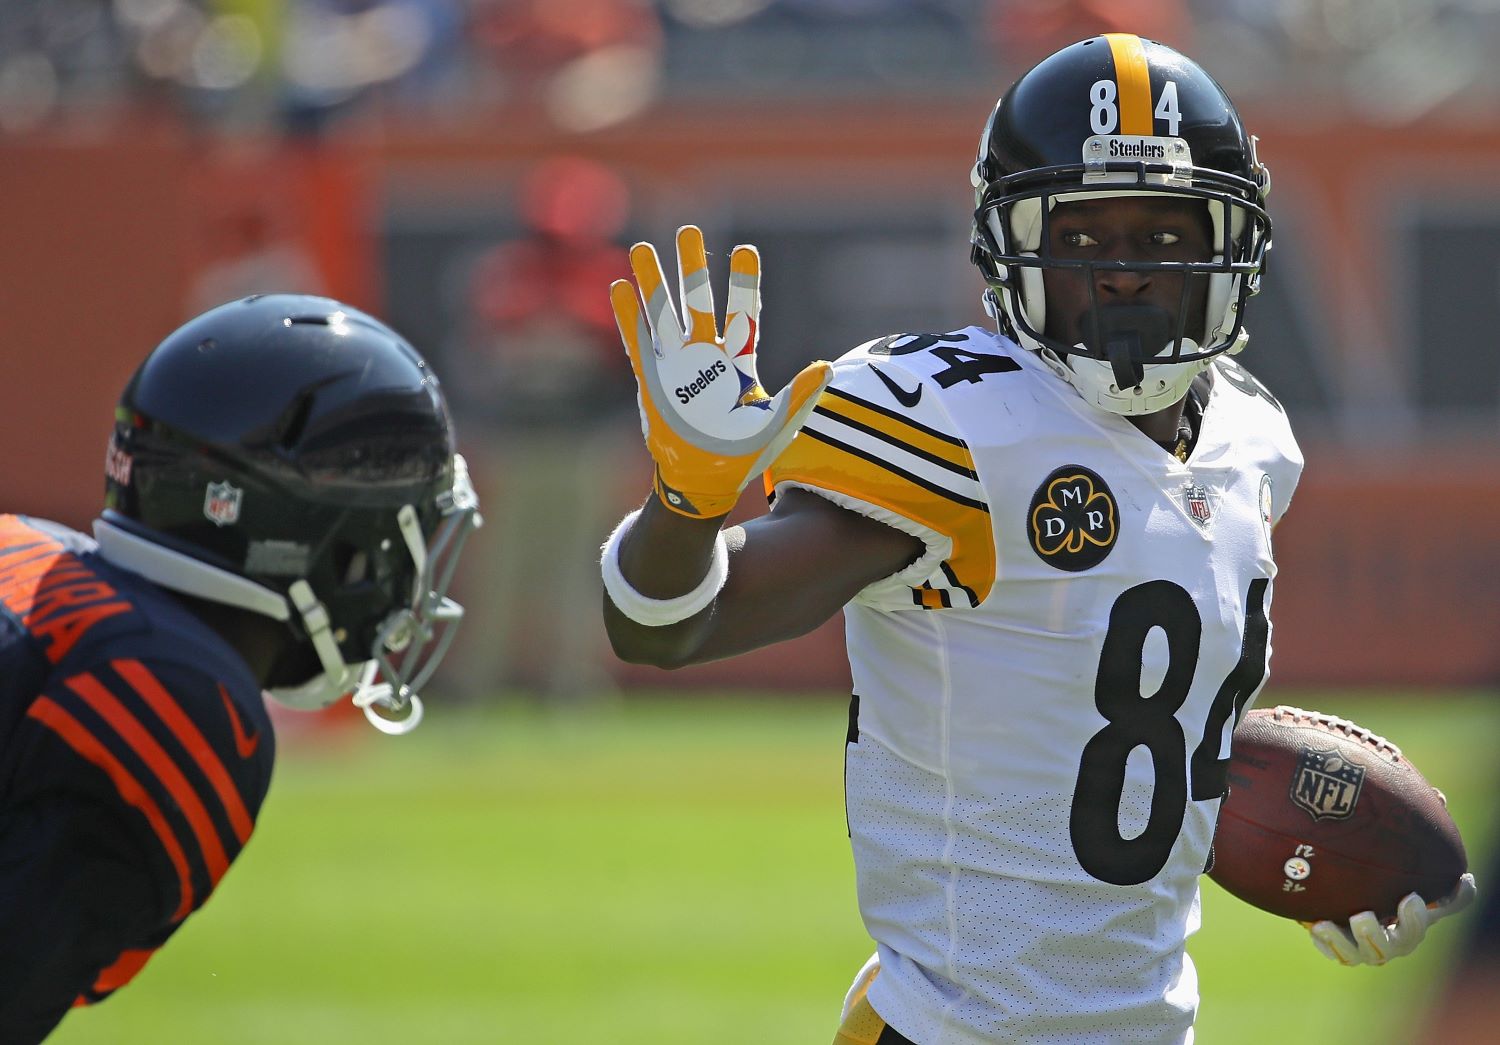 Antonio Brown just sent a clear message about joining the Chicago Bears.